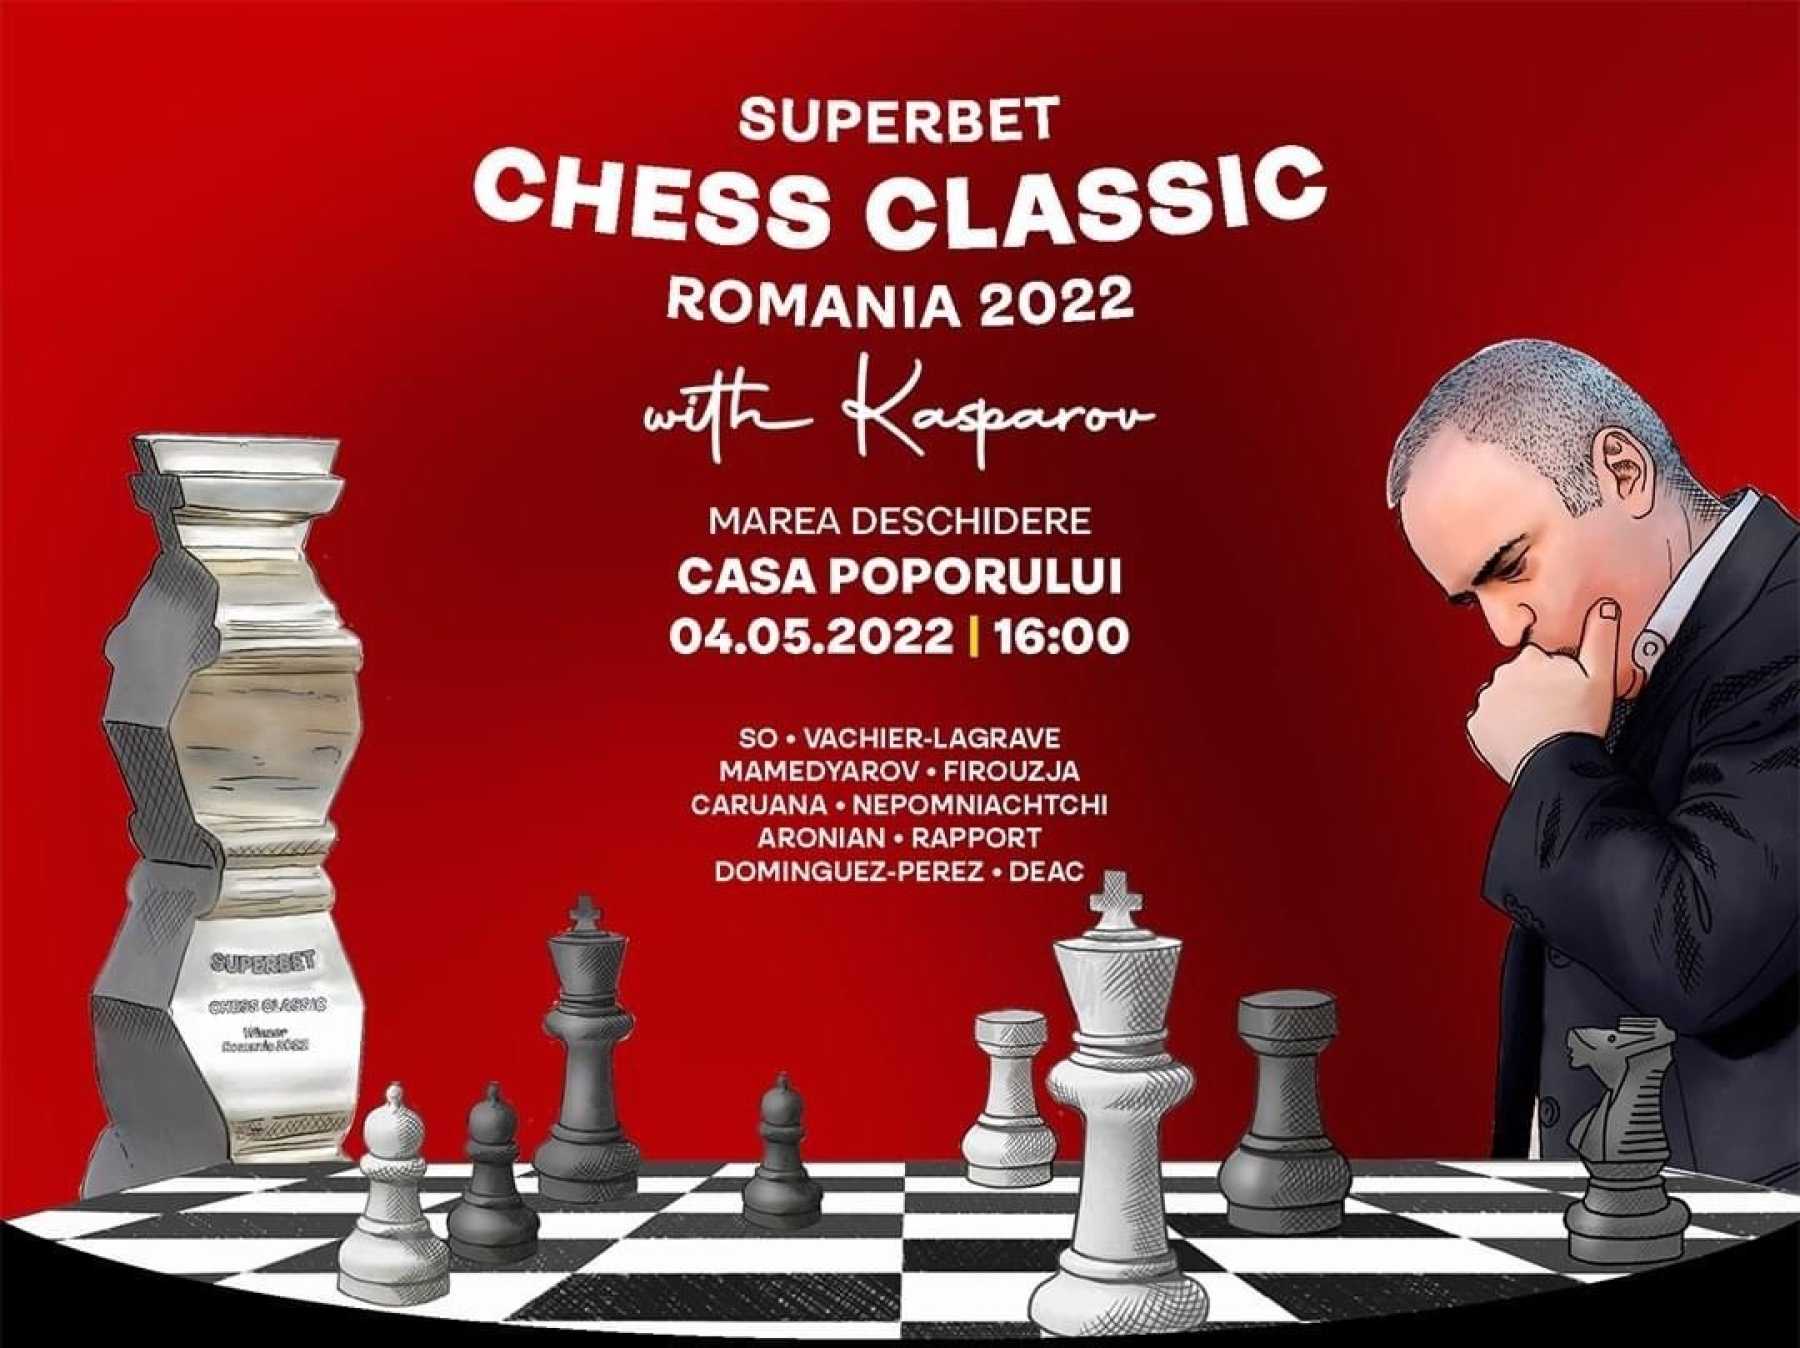 One United Properties supports Superbet Chess Classic Romania 2022, an event starring prominent chess personalities such as Garry Kasparov